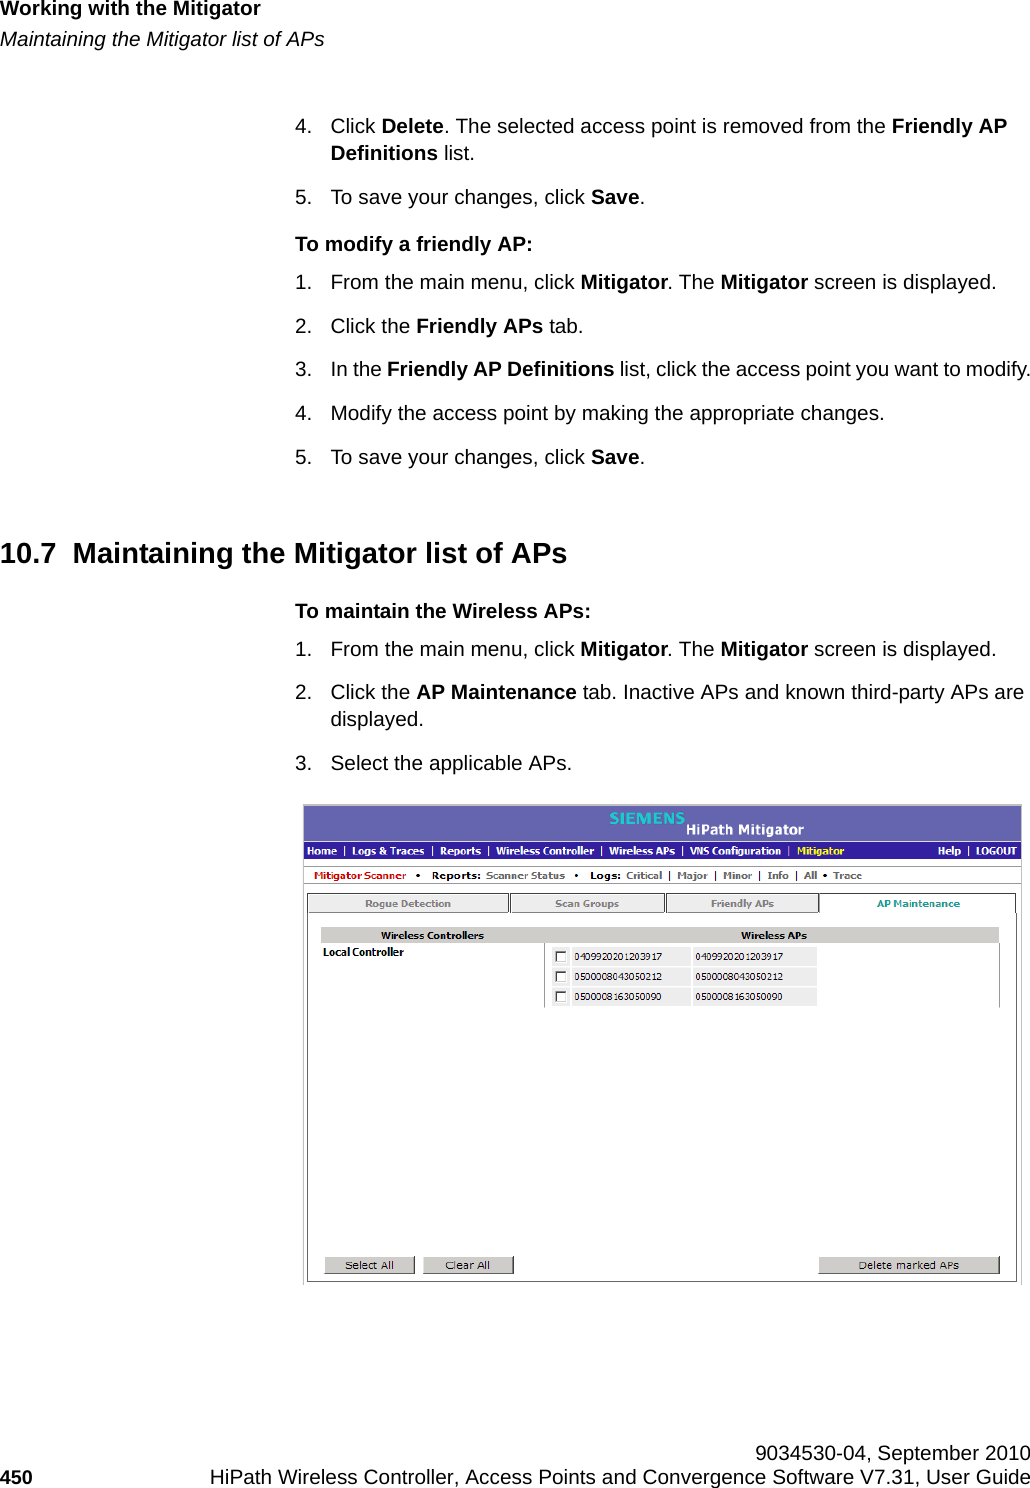 Working with the Mitigatorhwc_mitigator.fmMaintaining the Mitigator list of APs 9034530-04, September 2010450 HiPath Wireless Controller, Access Points and Convergence Software V7.31, User Guide        4. Click Delete. The selected access point is removed from the Friendly AP Definitions list.5. To save your changes, click Save.To modify a friendly AP:1. From the main menu, click Mitigator. The Mitigator screen is displayed.2. Click the Friendly APs tab. 3. In the Friendly AP Definitions list, click the access point you want to modify.4. Modify the access point by making the appropriate changes.5. To save your changes, click Save.10.7  Maintaining the Mitigator list of APsTo maintain the Wireless APs:1. From the main menu, click Mitigator. The Mitigator screen is displayed.2. Click the AP Maintenance tab. Inactive APs and known third-party APs are displayed.3. Select the applicable APs. 